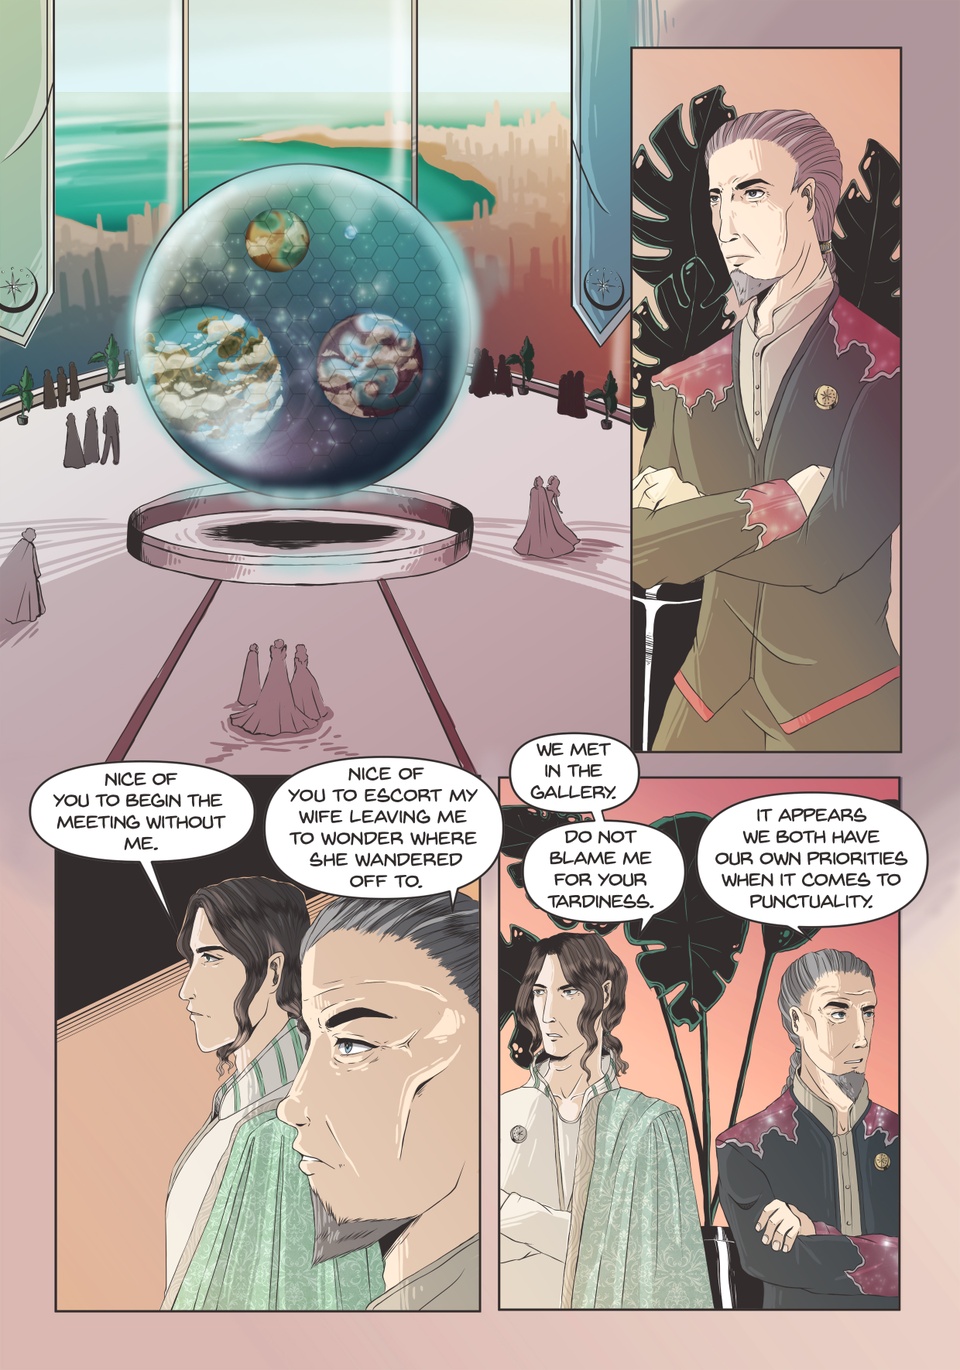 Issue 1 | The Eureka Cascades | Page 43